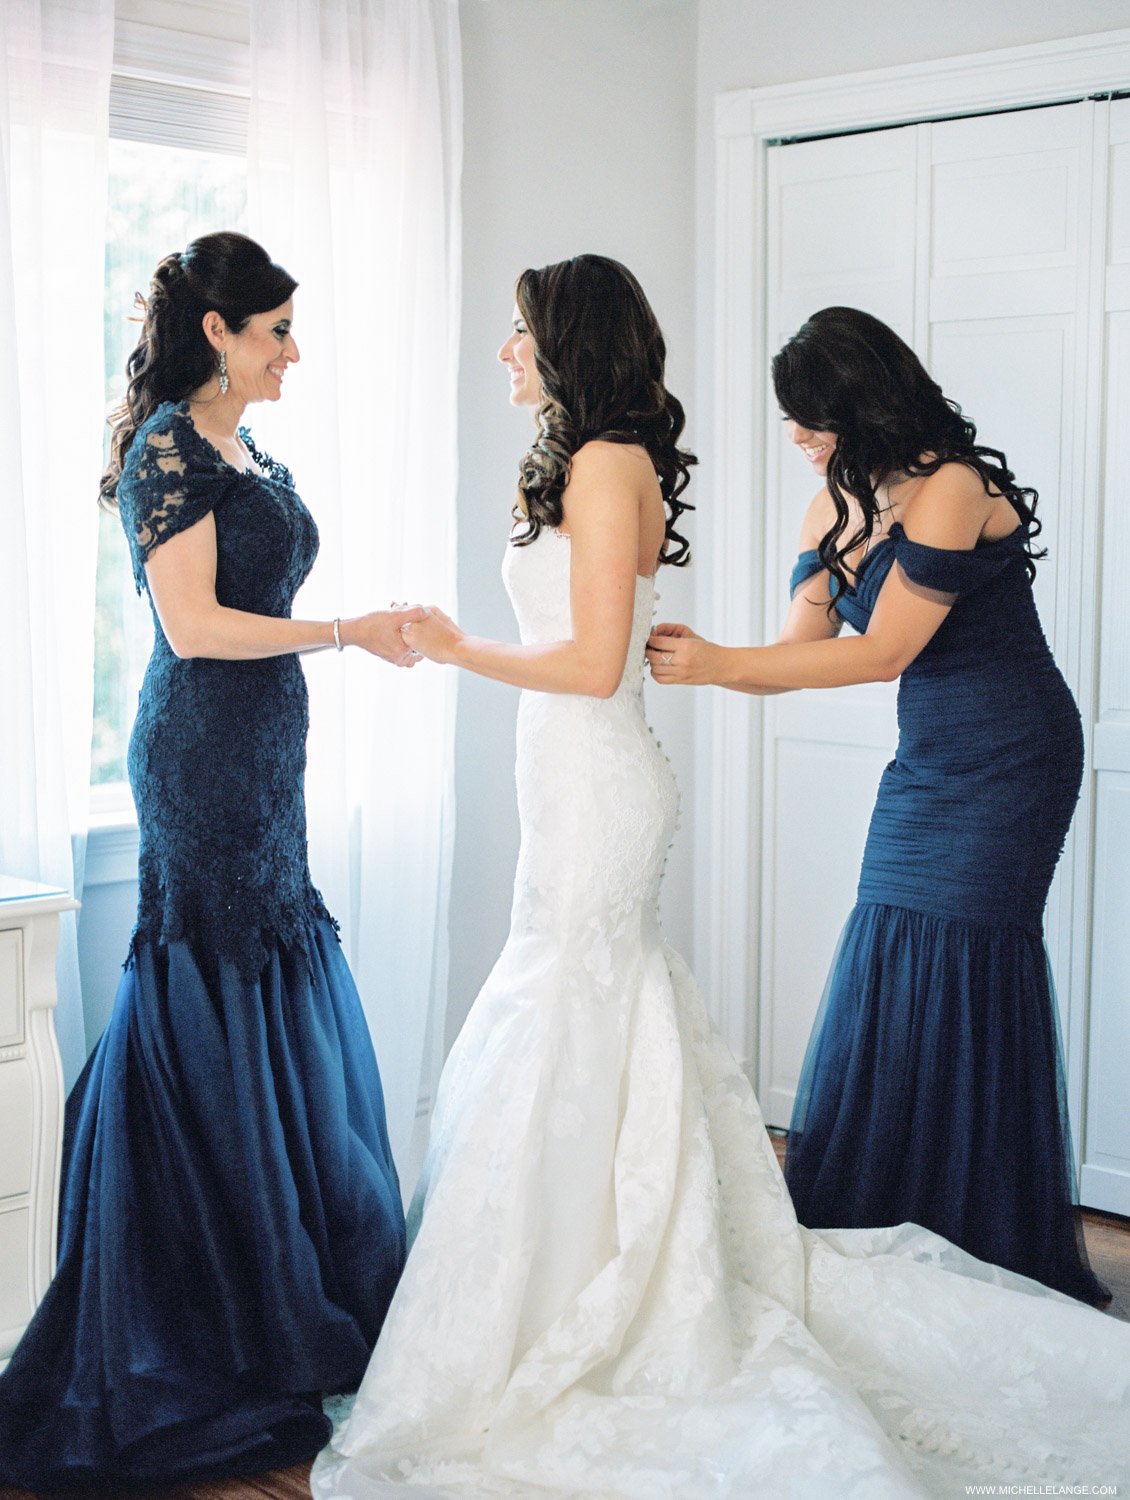 Bride with mom and maid of honor getting ready